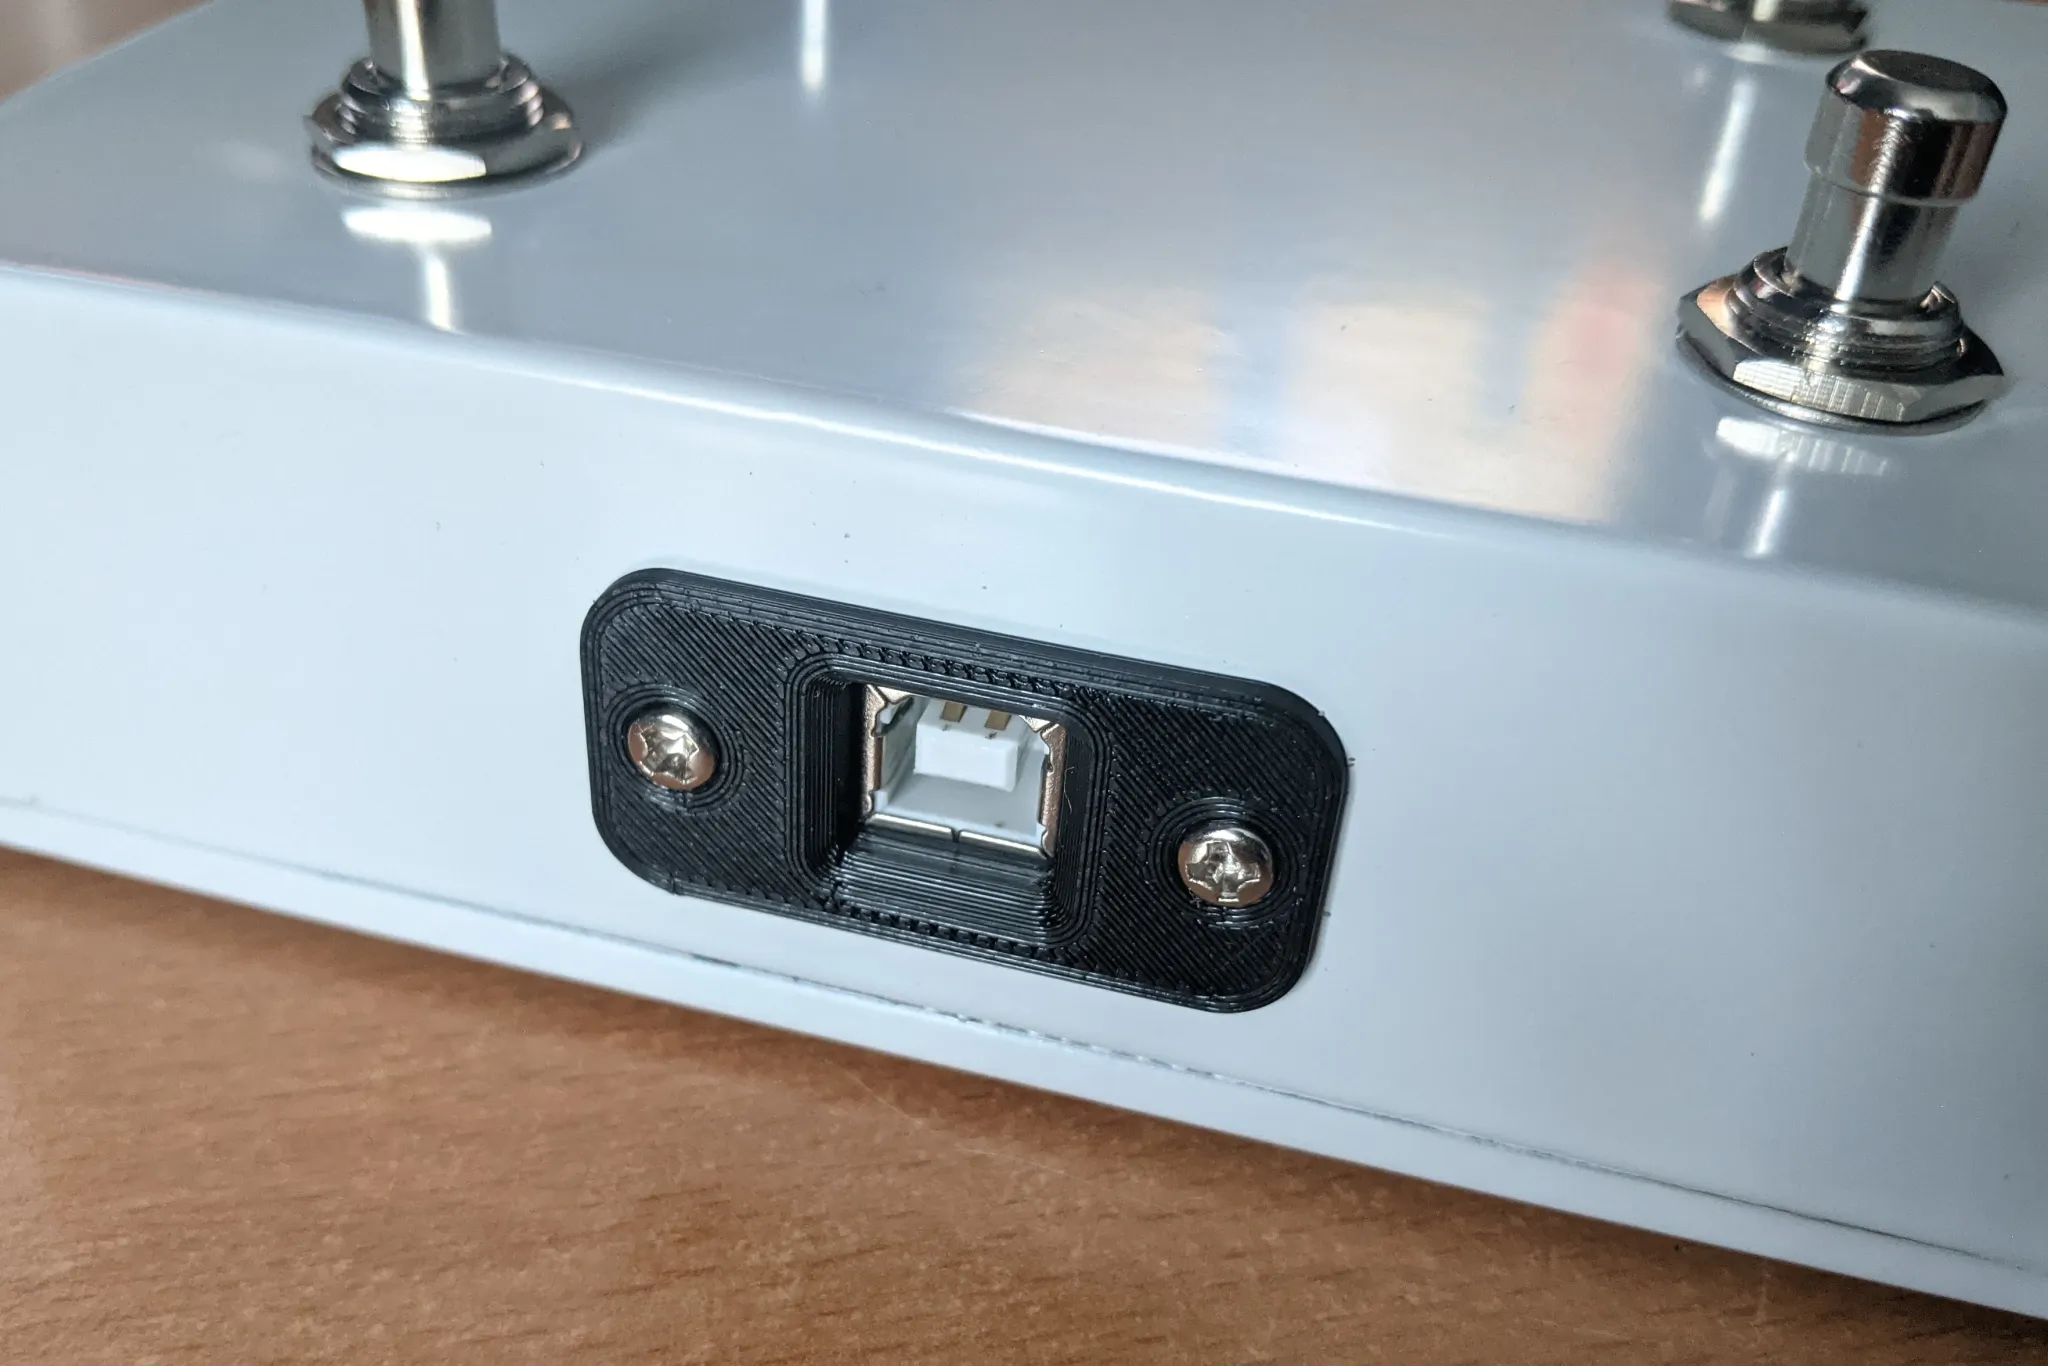 The side of a metal enclosure with a USB type B connector in a 3D-printed
black surround.